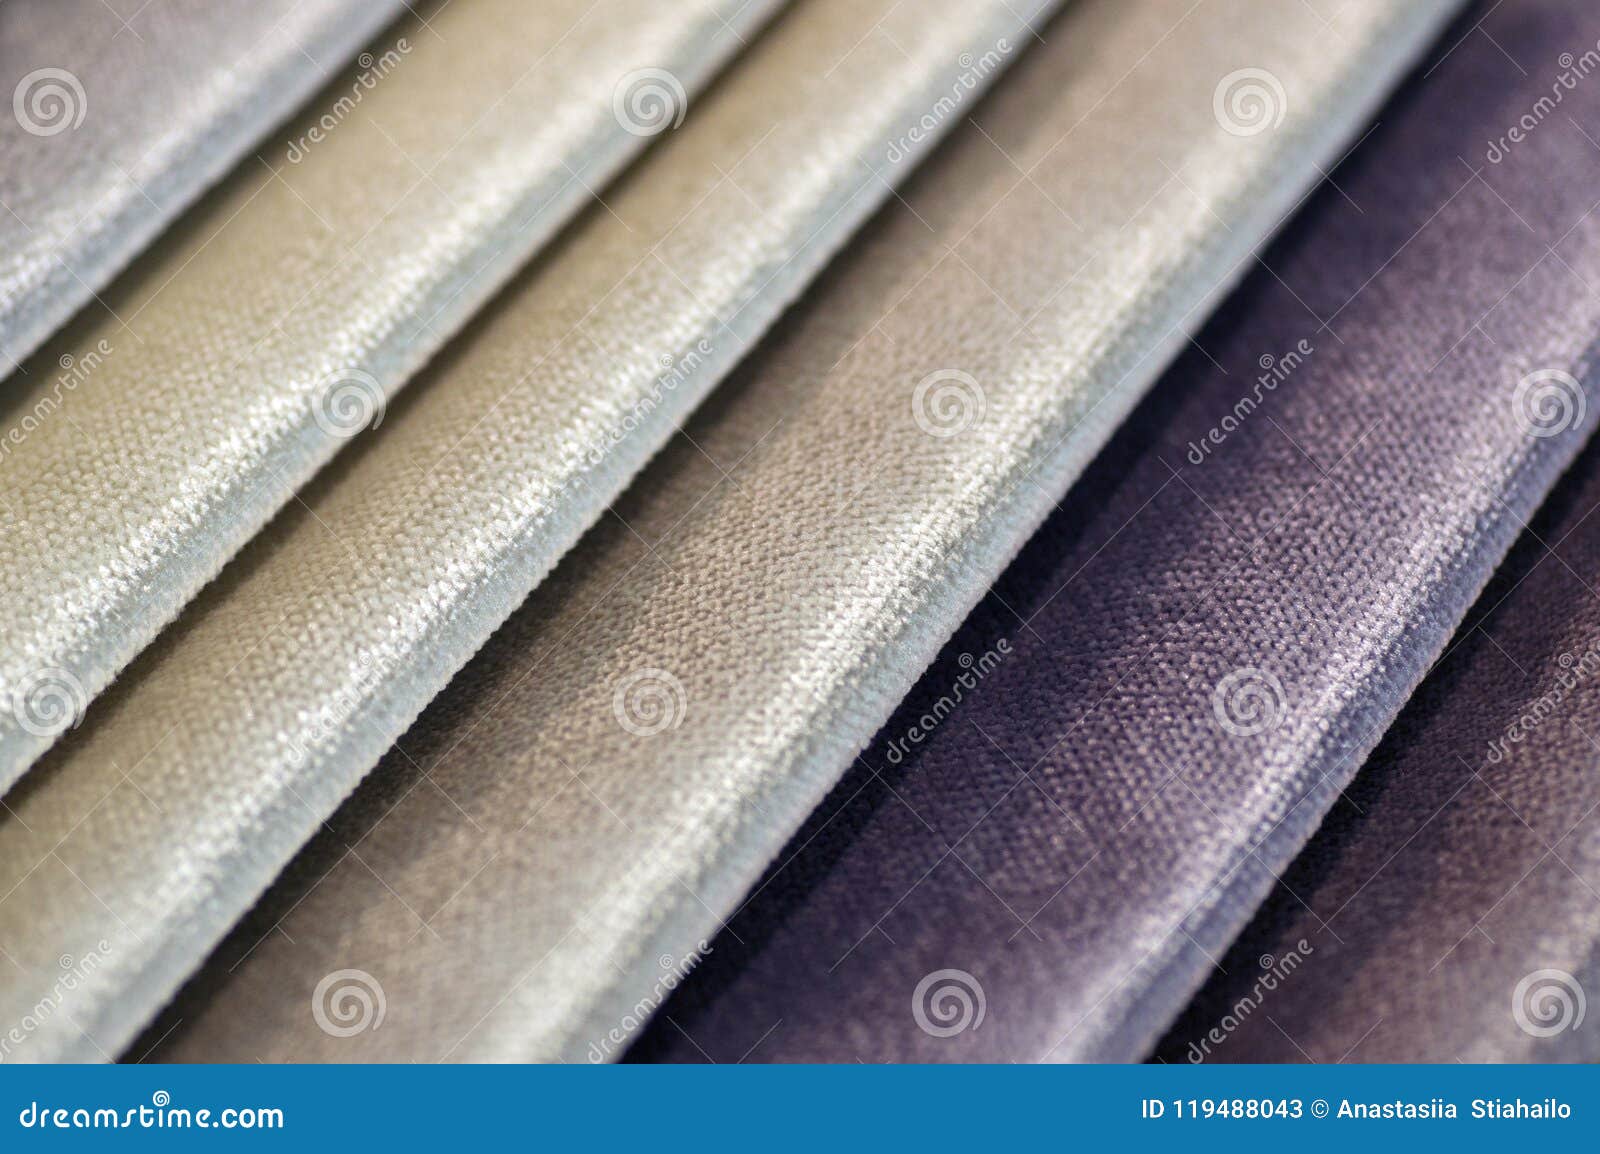 Catalog Of Multicolored Cloth From Matting Fabric Texture Background ...